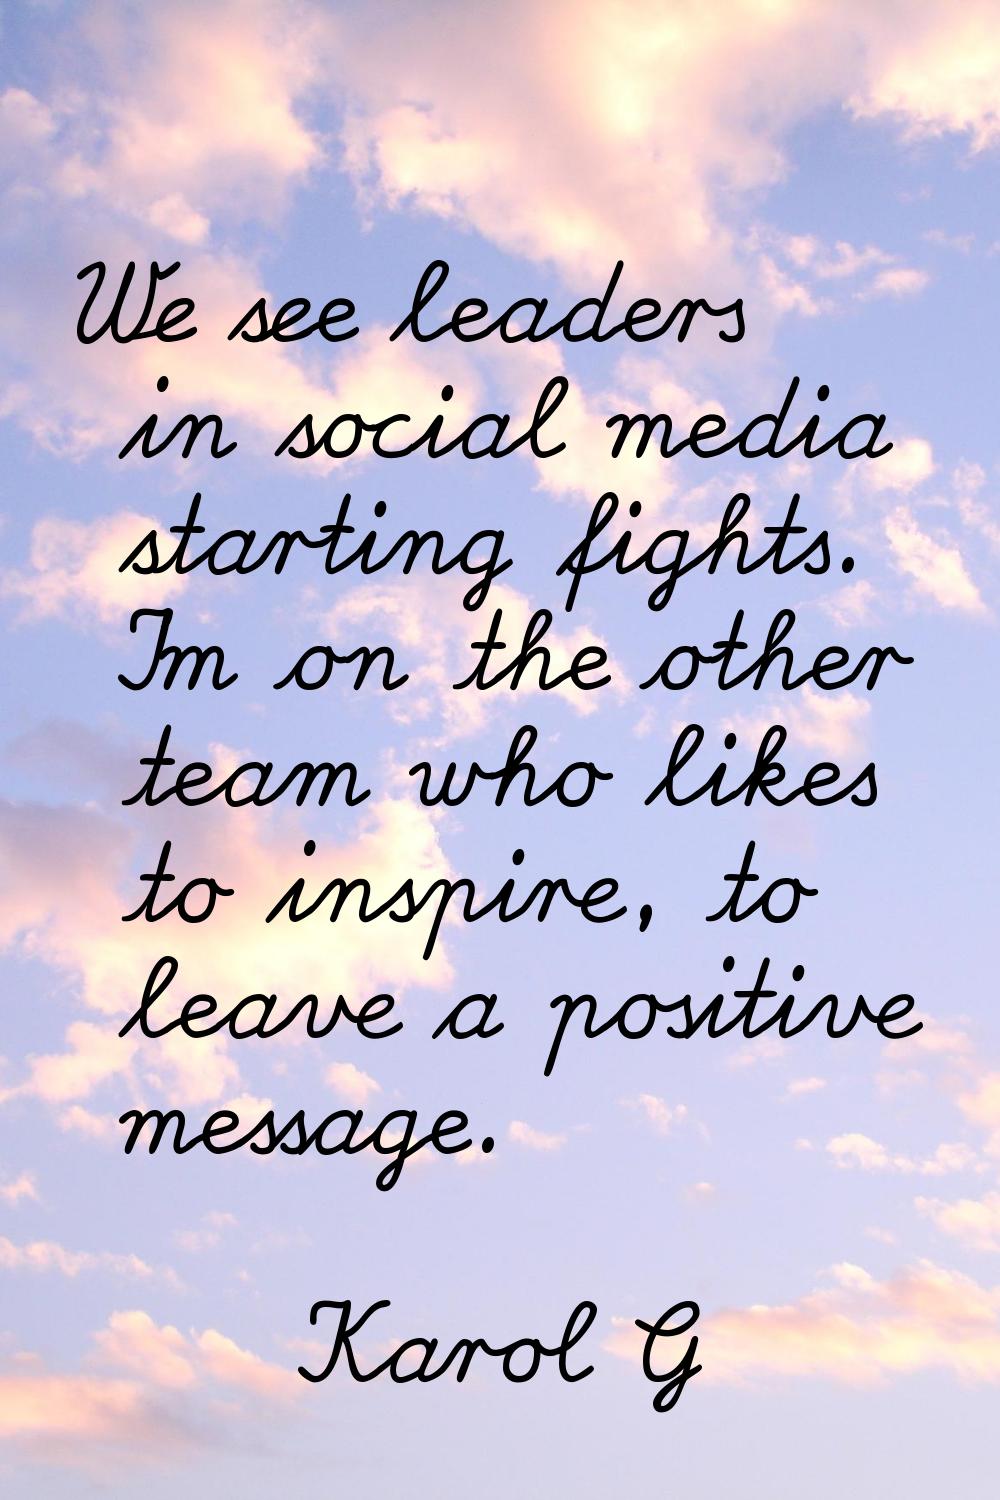 We see leaders in social media starting fights. I'm on the other team who likes to inspire, to leav